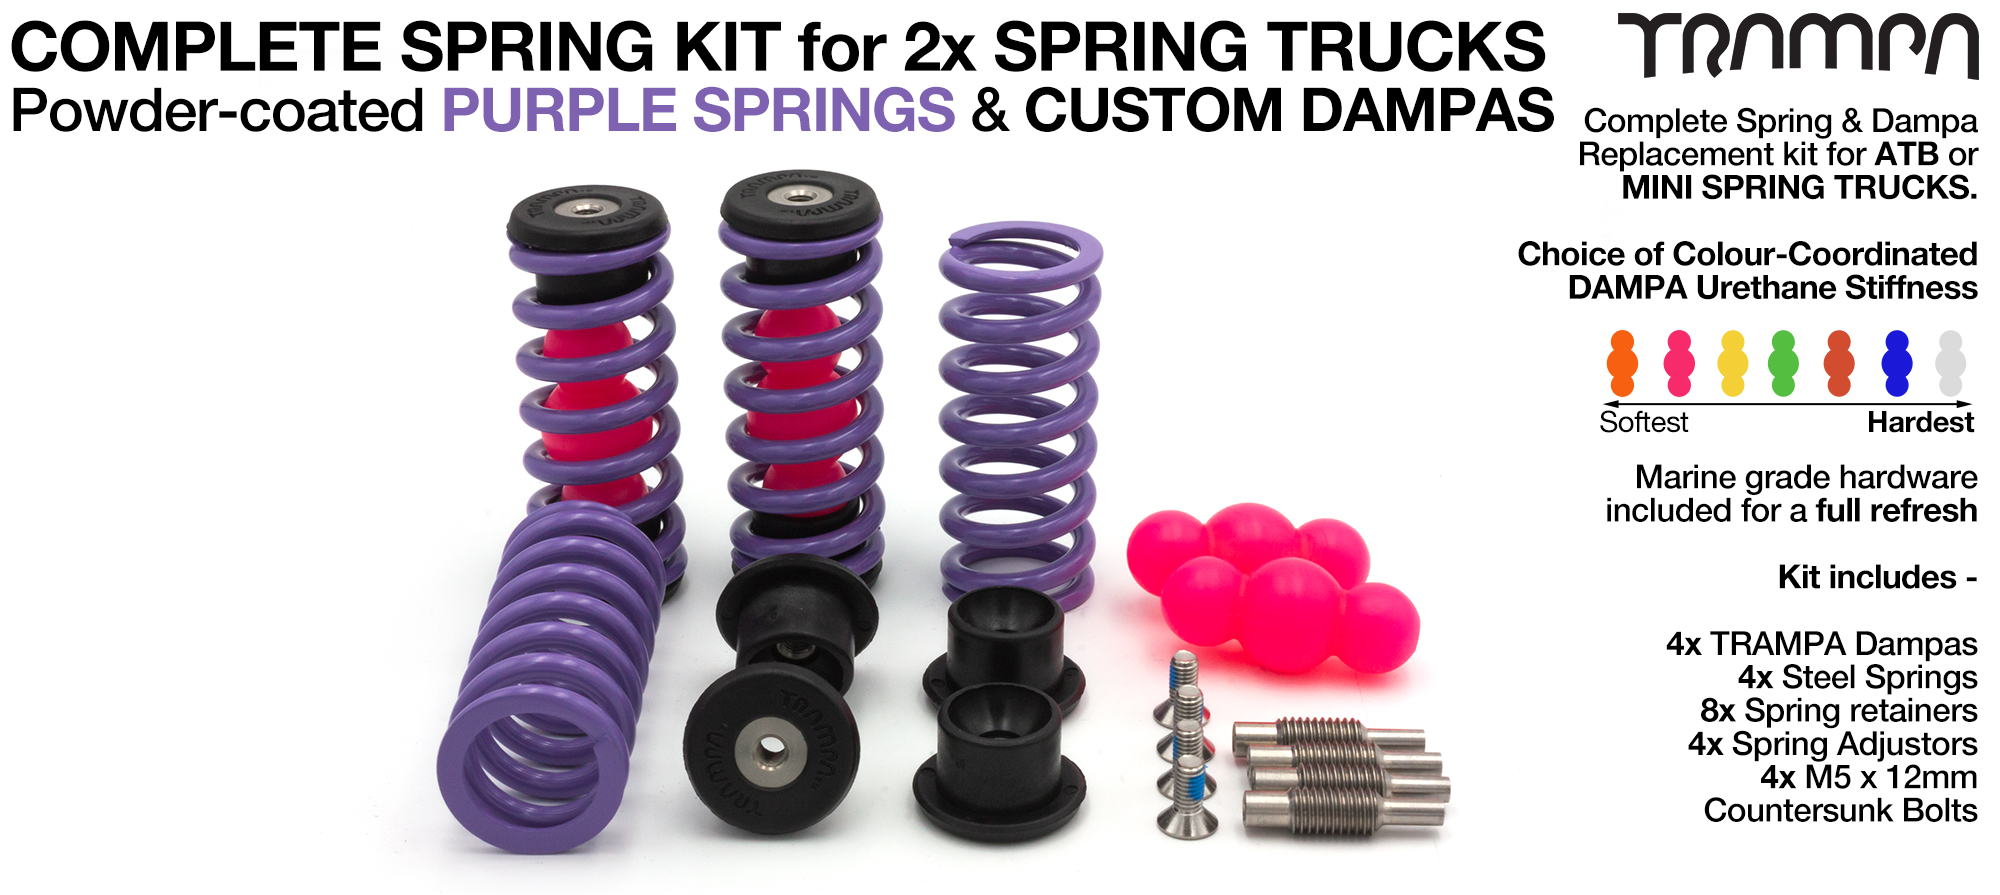 Complete Spring kit for 1x Board = 4x PURPLE Springs 4x Dampa 8x Spring Retainers 4x Spring Adjuster & 4 M5x12mm Countersunk Bolt